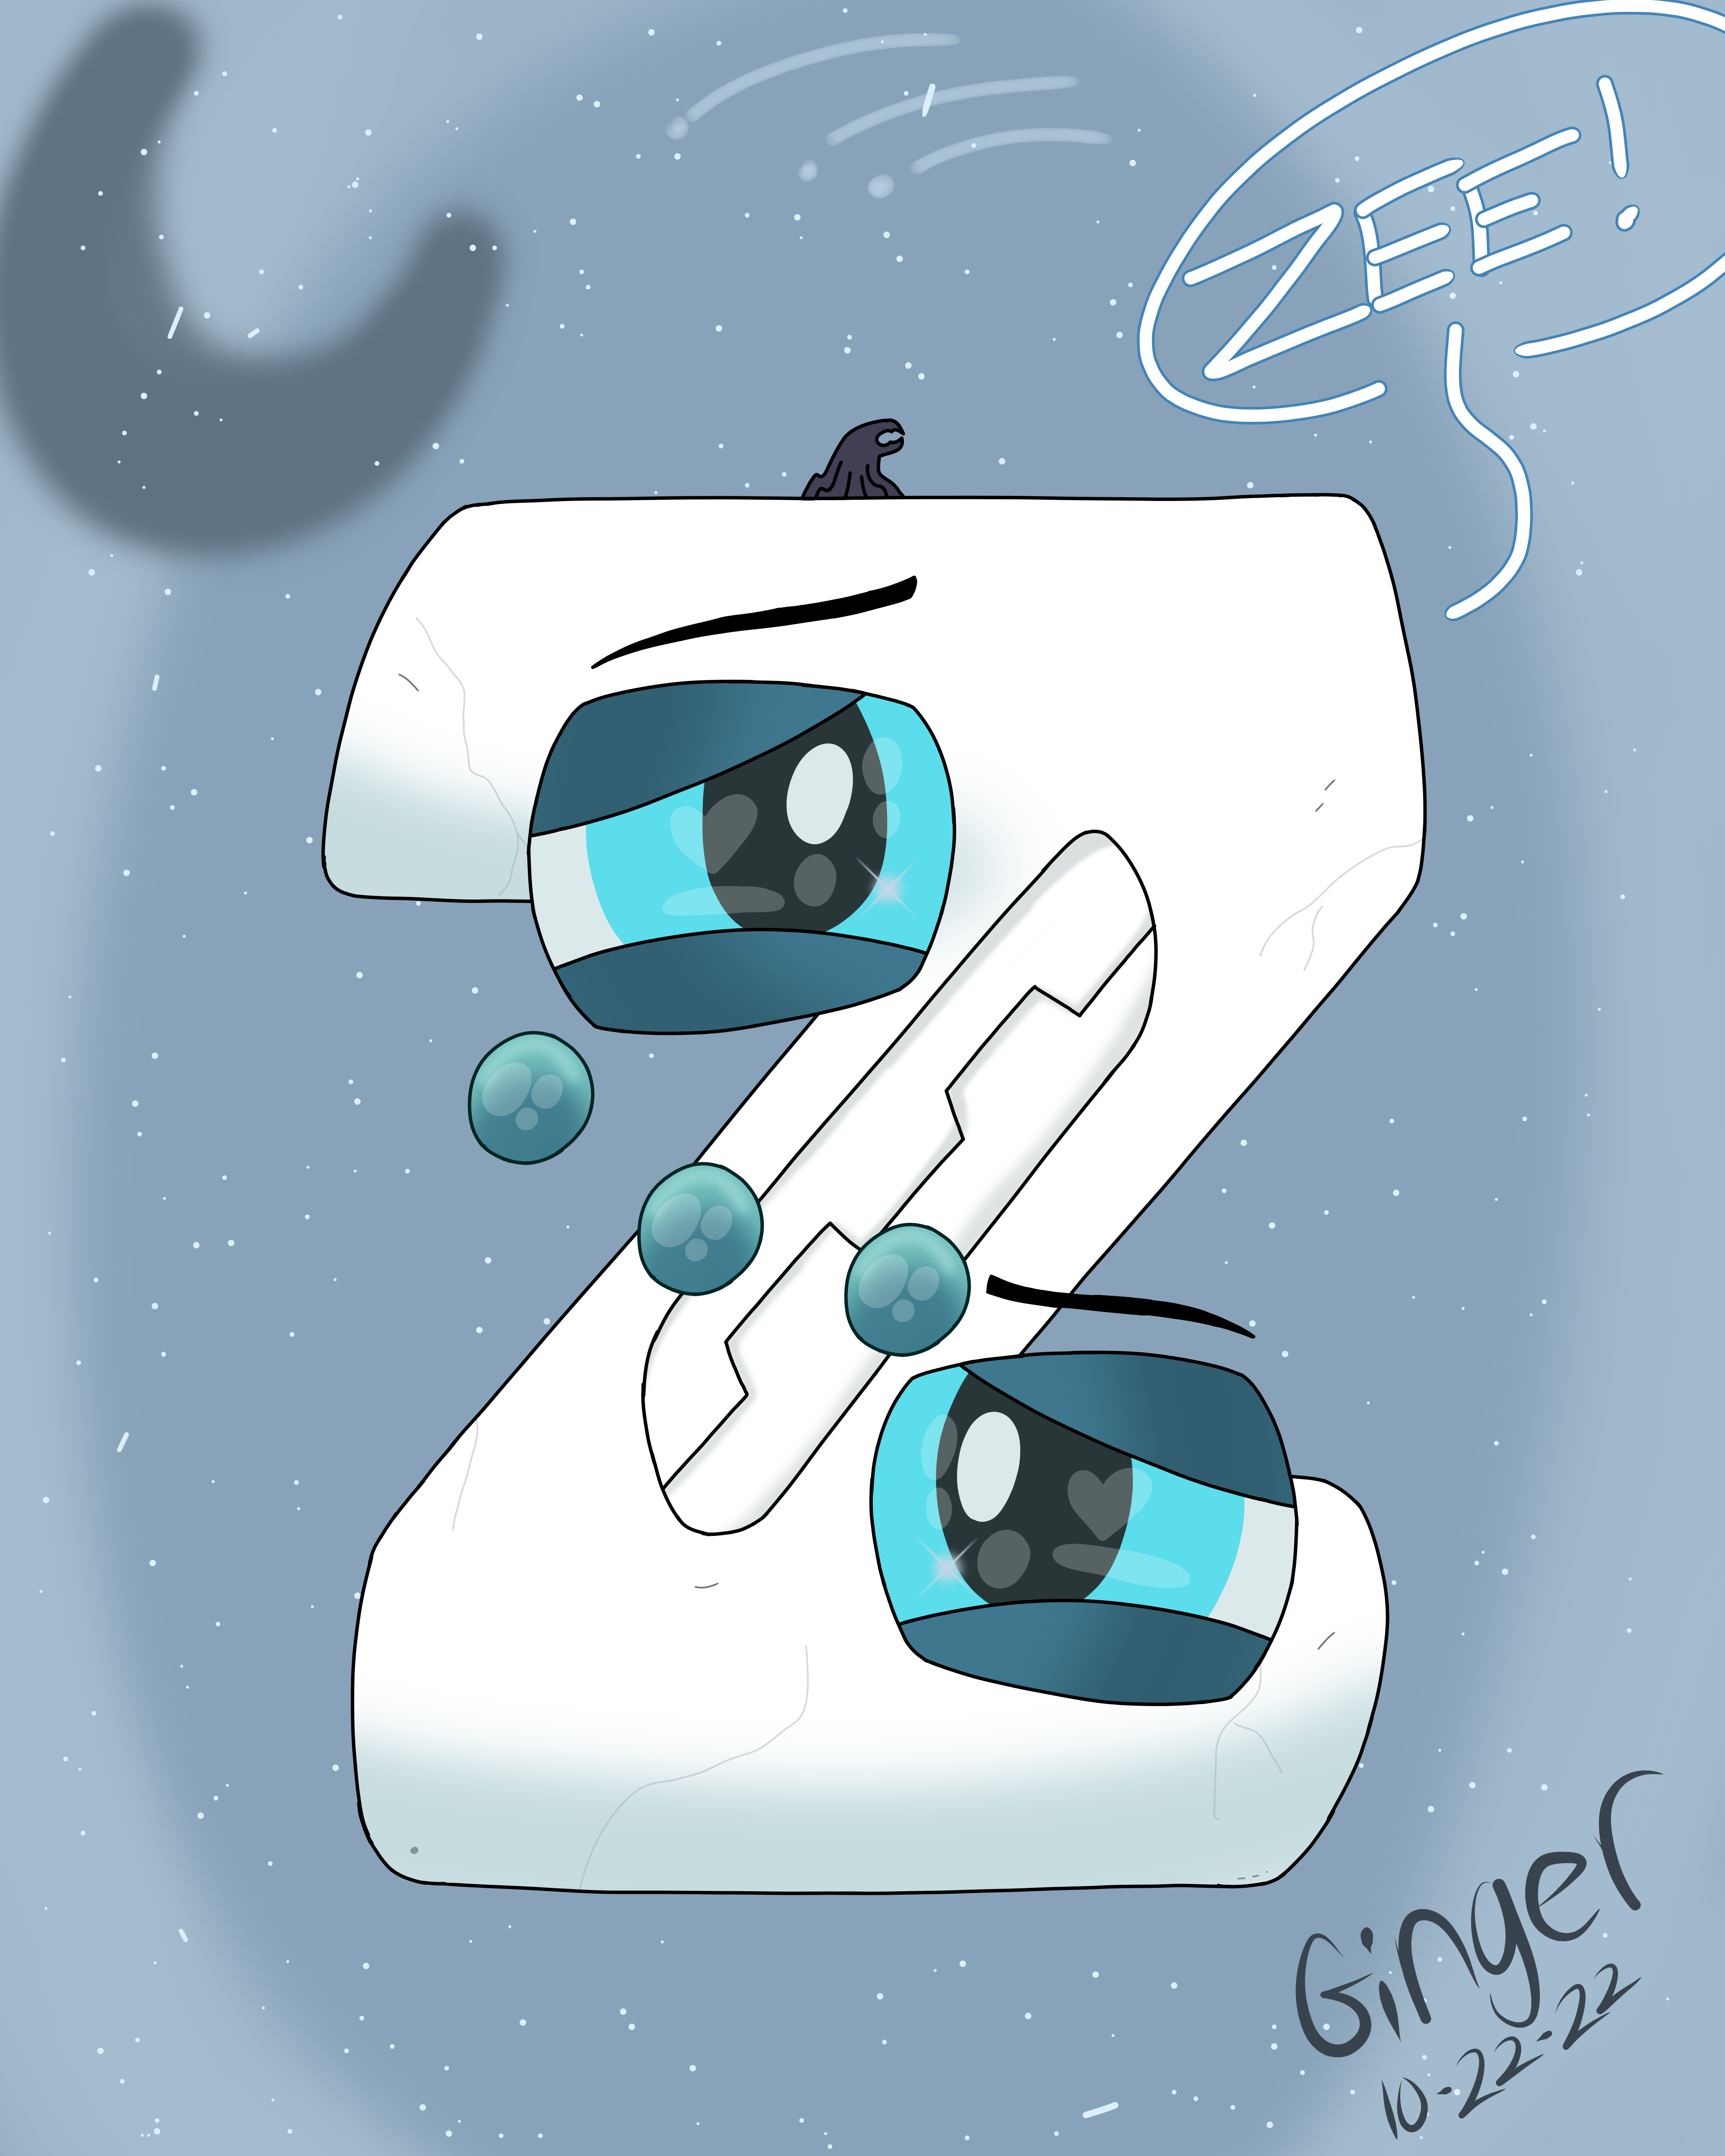 The ALPHABET LORE BABY Z! by TheBobby65 on DeviantArt